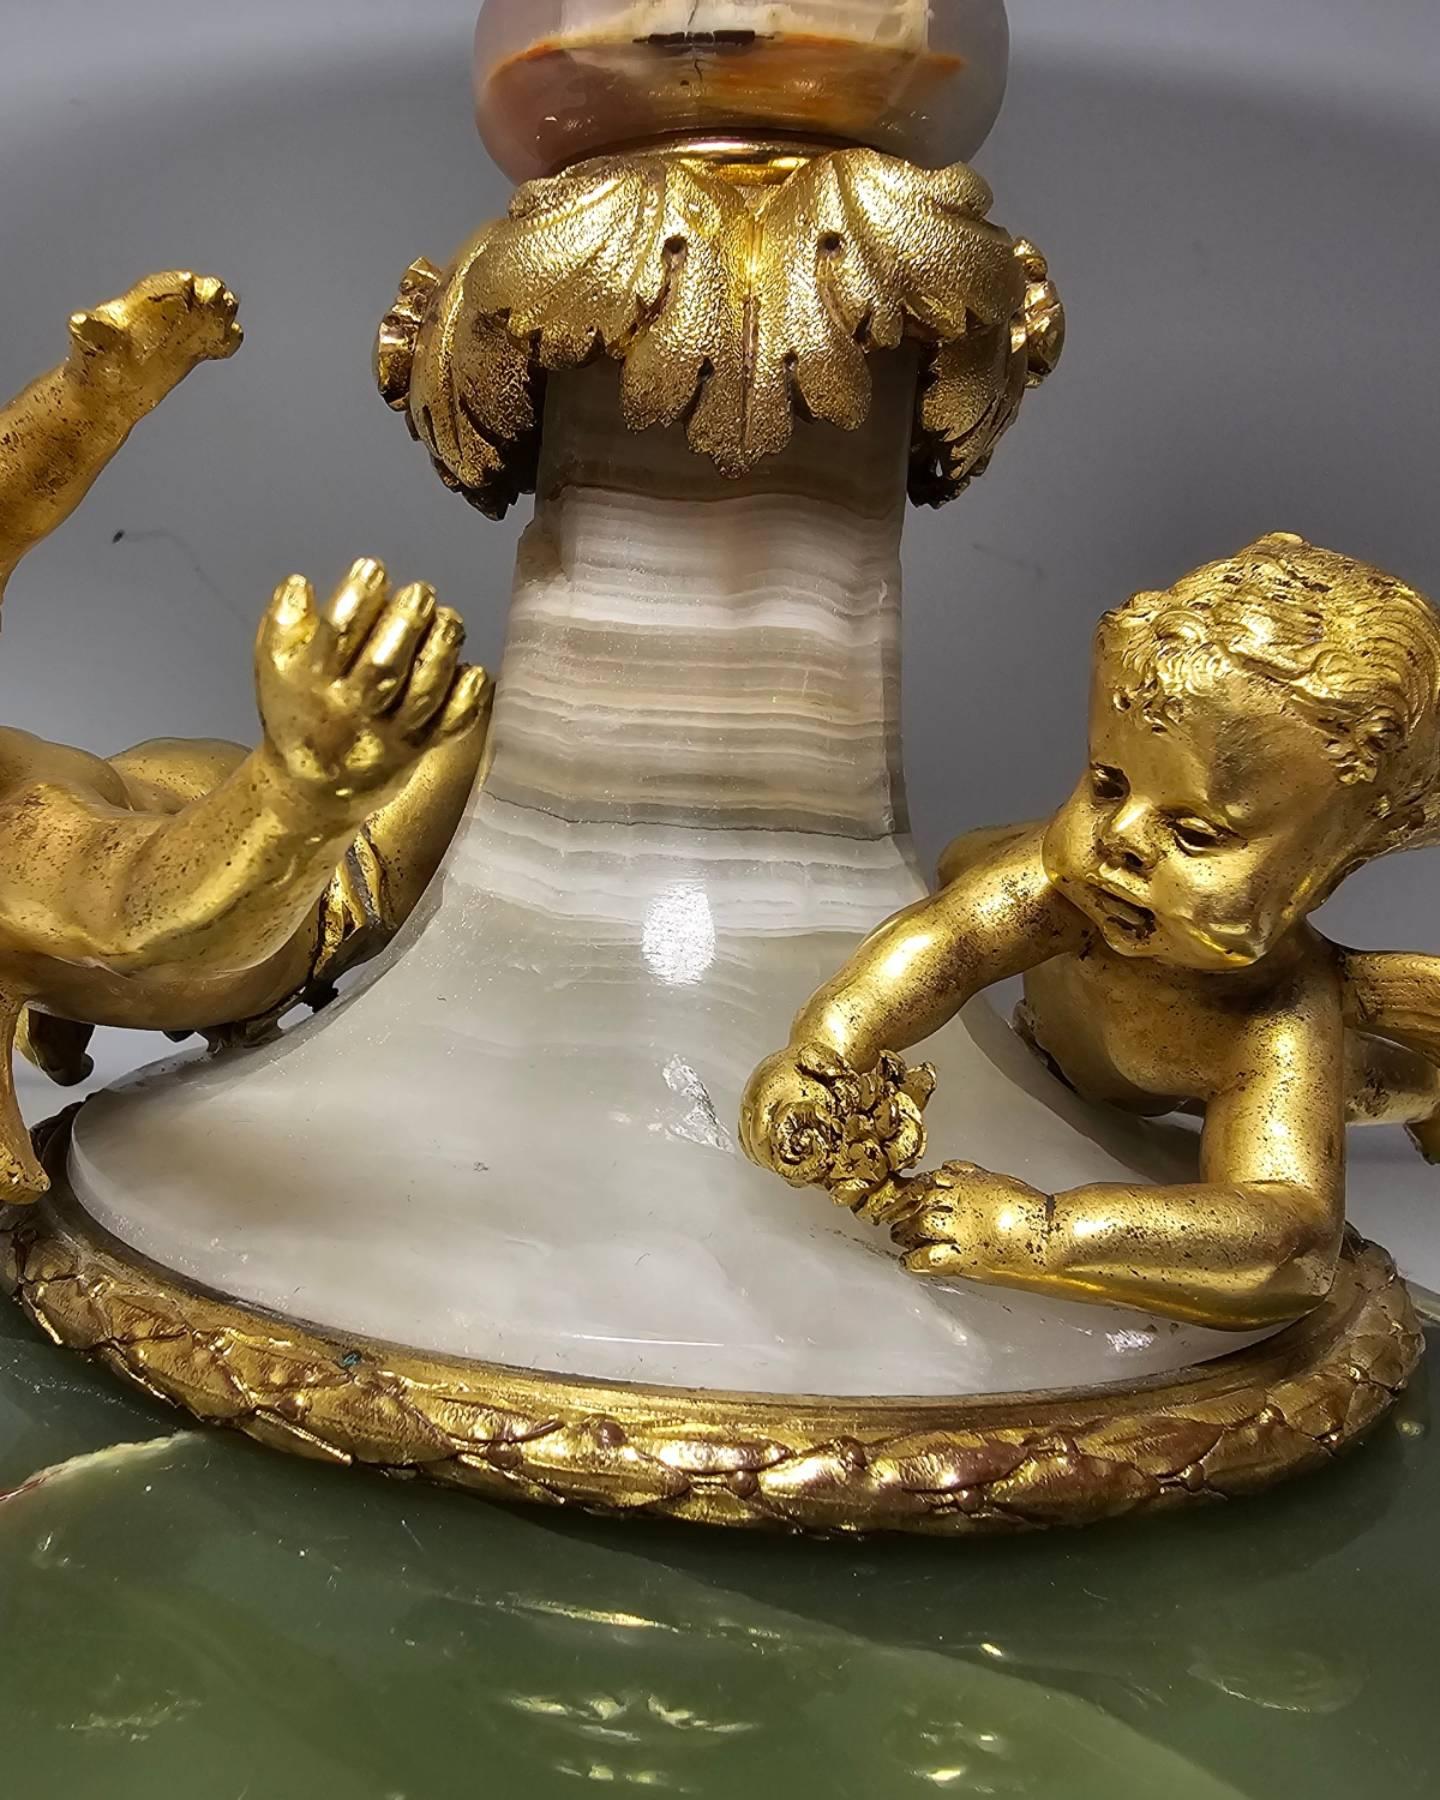 Attributed To Eugène Cornu, gilded bronze  agate Et Onyx d'Algérie, centerpiece 
A French elegant 19th century gilt bronze agate and onyx cente dish with two gilded bronze  cherubs.
The two  cherubs playing around the dish, with several specimen of